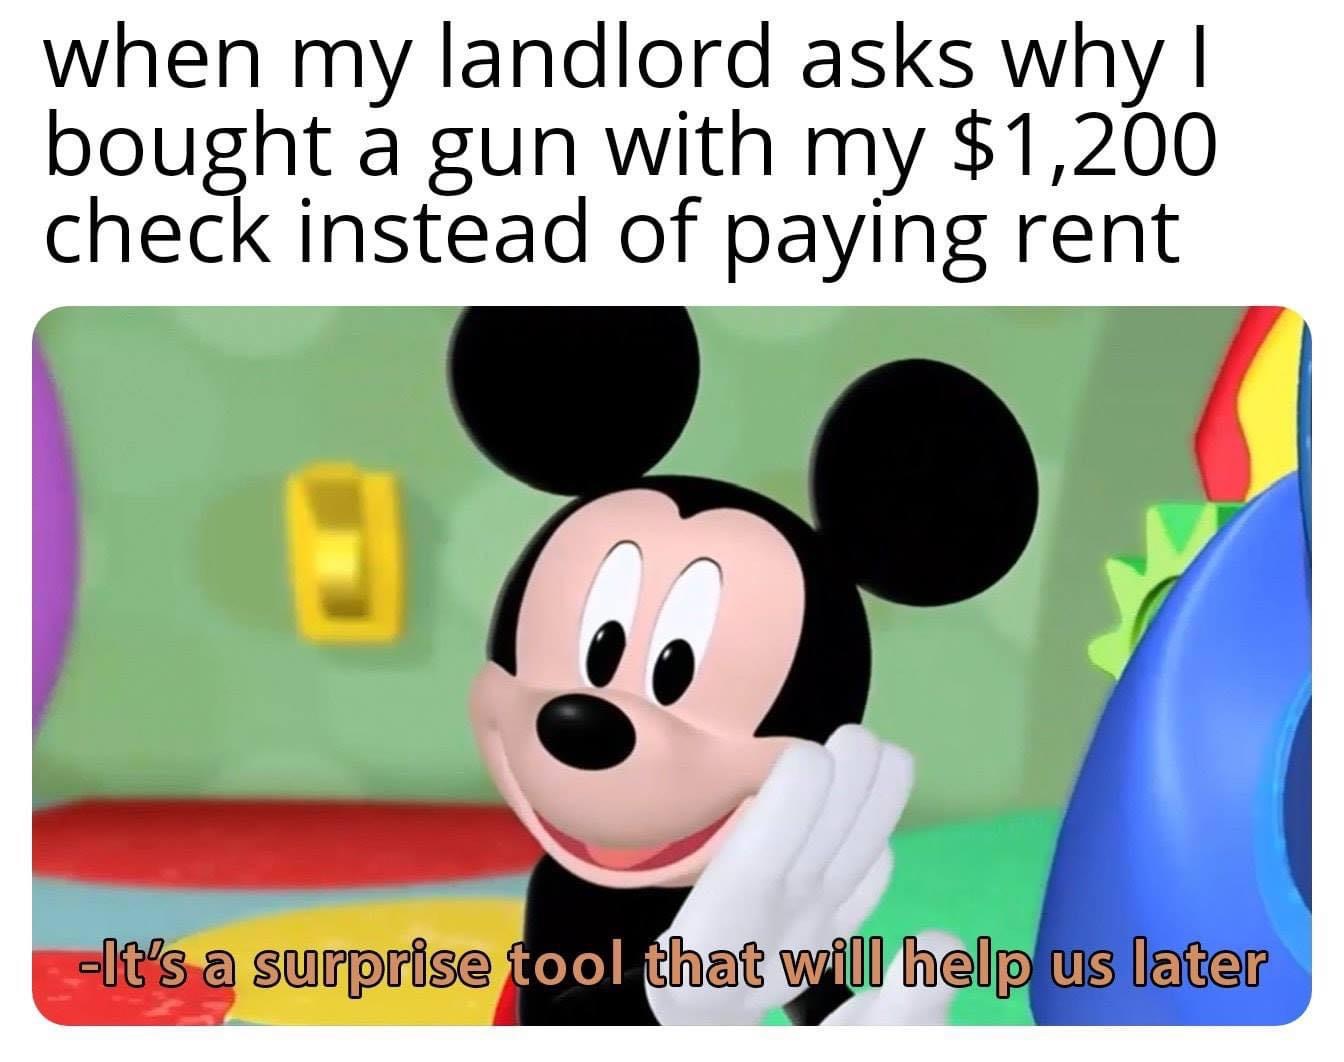 dank christian memes - when my landlord asks why | bought a gun with my $1,200 check instead of paying rent It's a surprise tool that will help us later